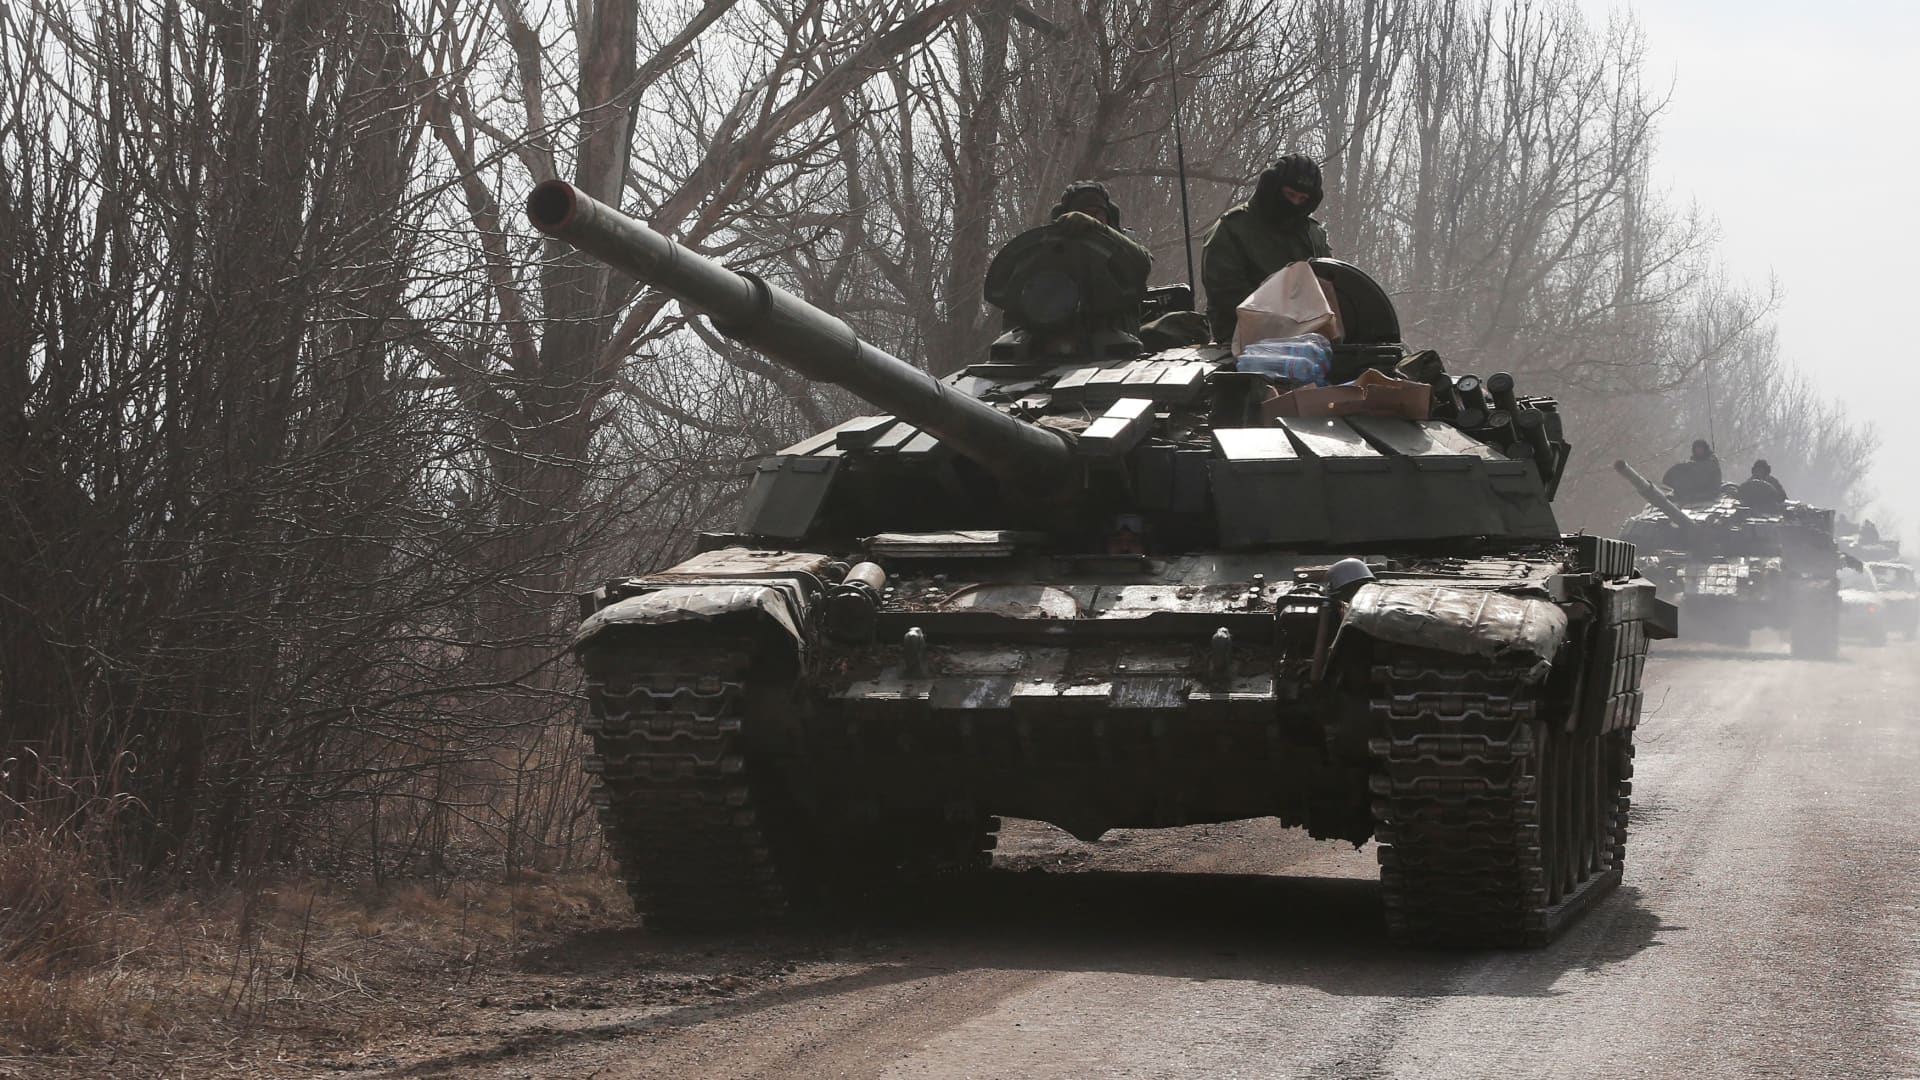 Service members of pro-Russian troops in uniforms without insignia are seen atop of a tank during Ukraine-Russia conflict outside the separatist-controlled town of Volnovakha in the Donetsk region, Ukraine March 15, 2022. 